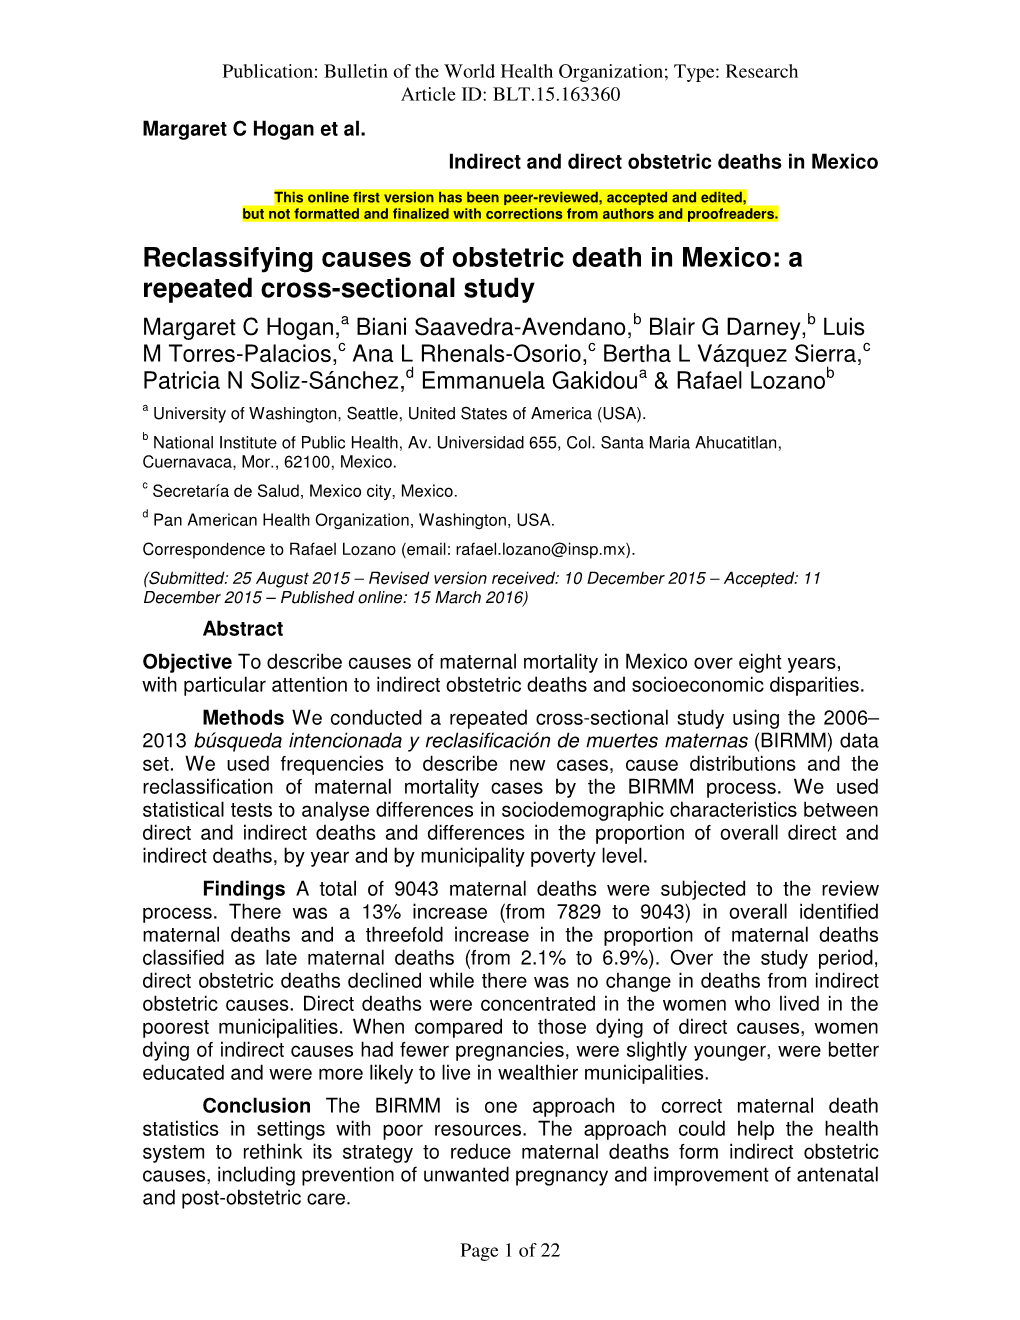 Reclassifying Causes of Obstetric Death in Mexico: a Repeated Cross